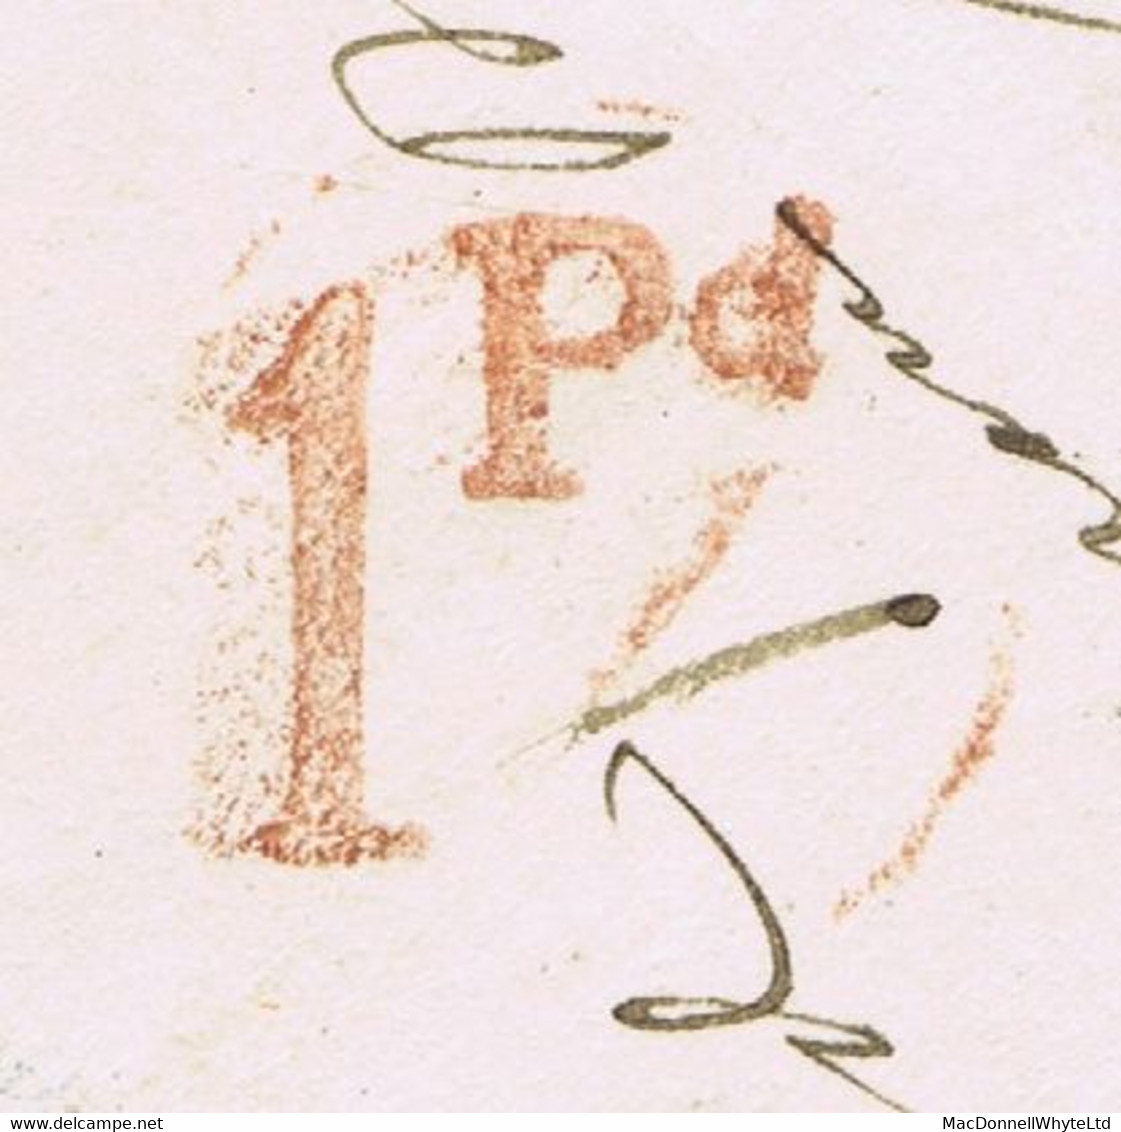 Ireland Louth Uniform Penny Post 1849 Distinctive Dundalk "1Pd" UPP Hs In Red On Cover To Drogheda, DUNDALK AU 25 1849 - Prefilatelia